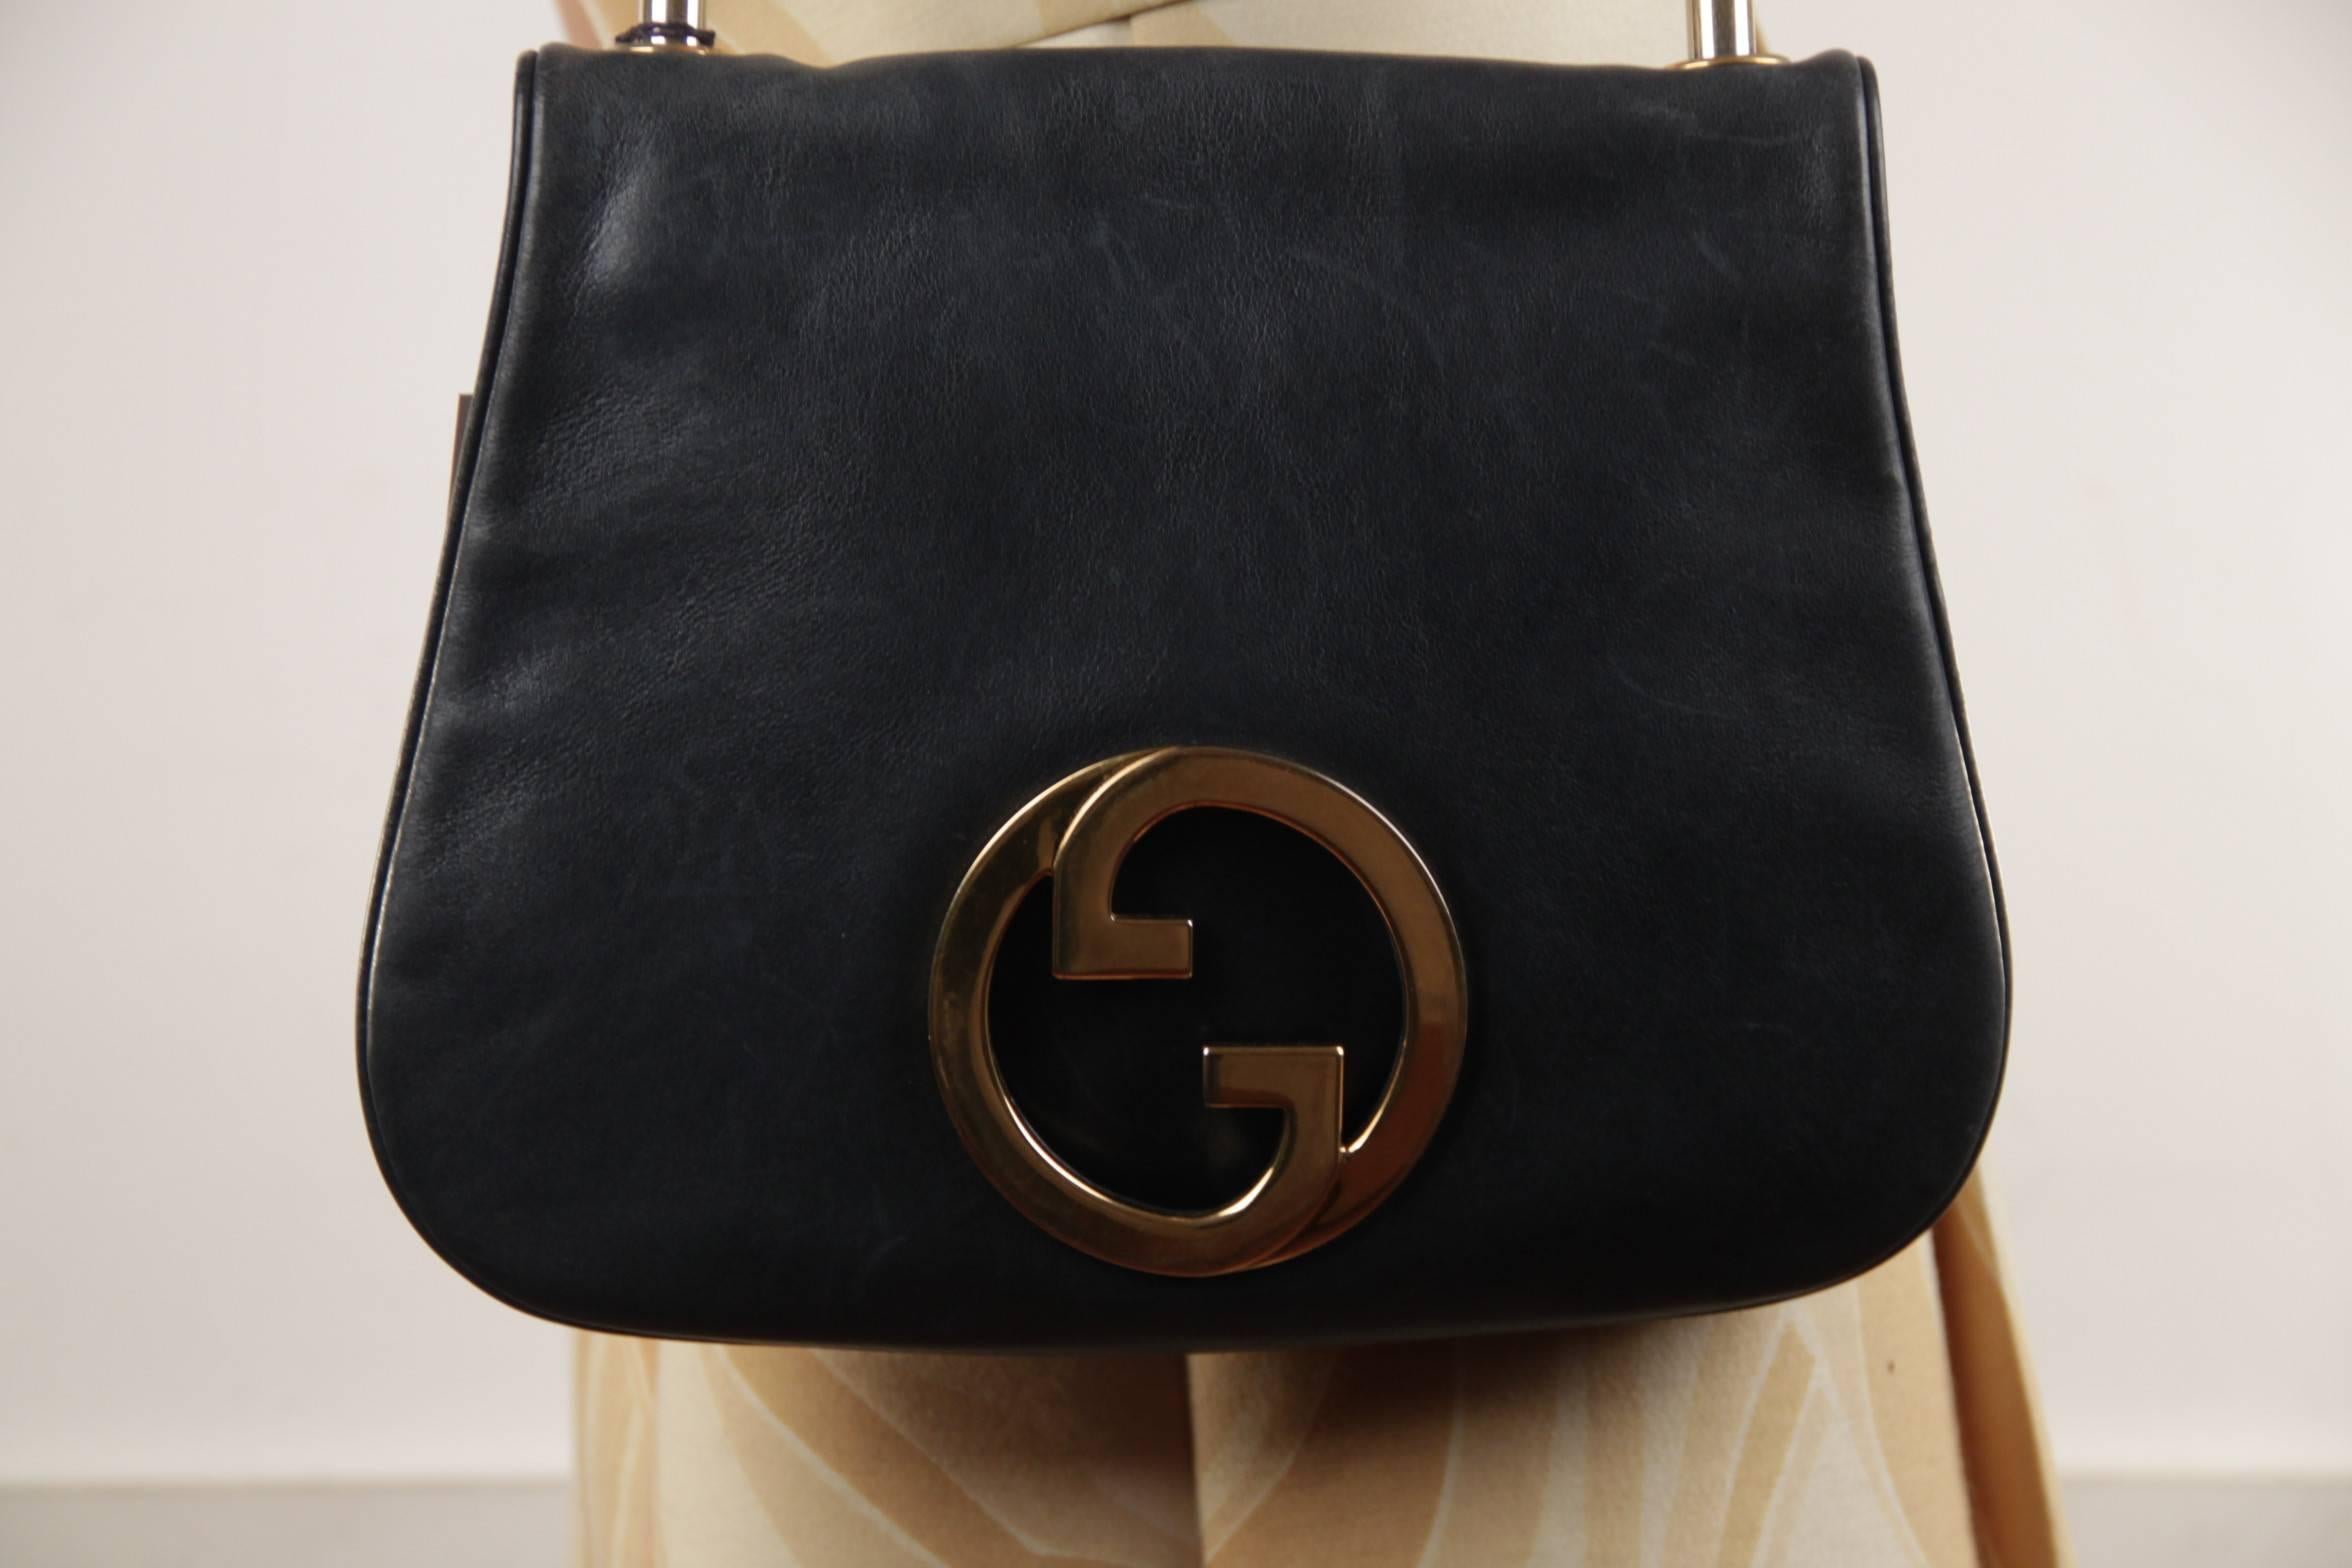  Brand: GUCCI - Made in Italy

Logos / Tags: 'Made in Italy by GUCCI' embossed inside, big GG - GUCCI logo on the front

Condition (please read our condition chart below): GENTLY USED~ Previously used, but no signs of significant soiling,